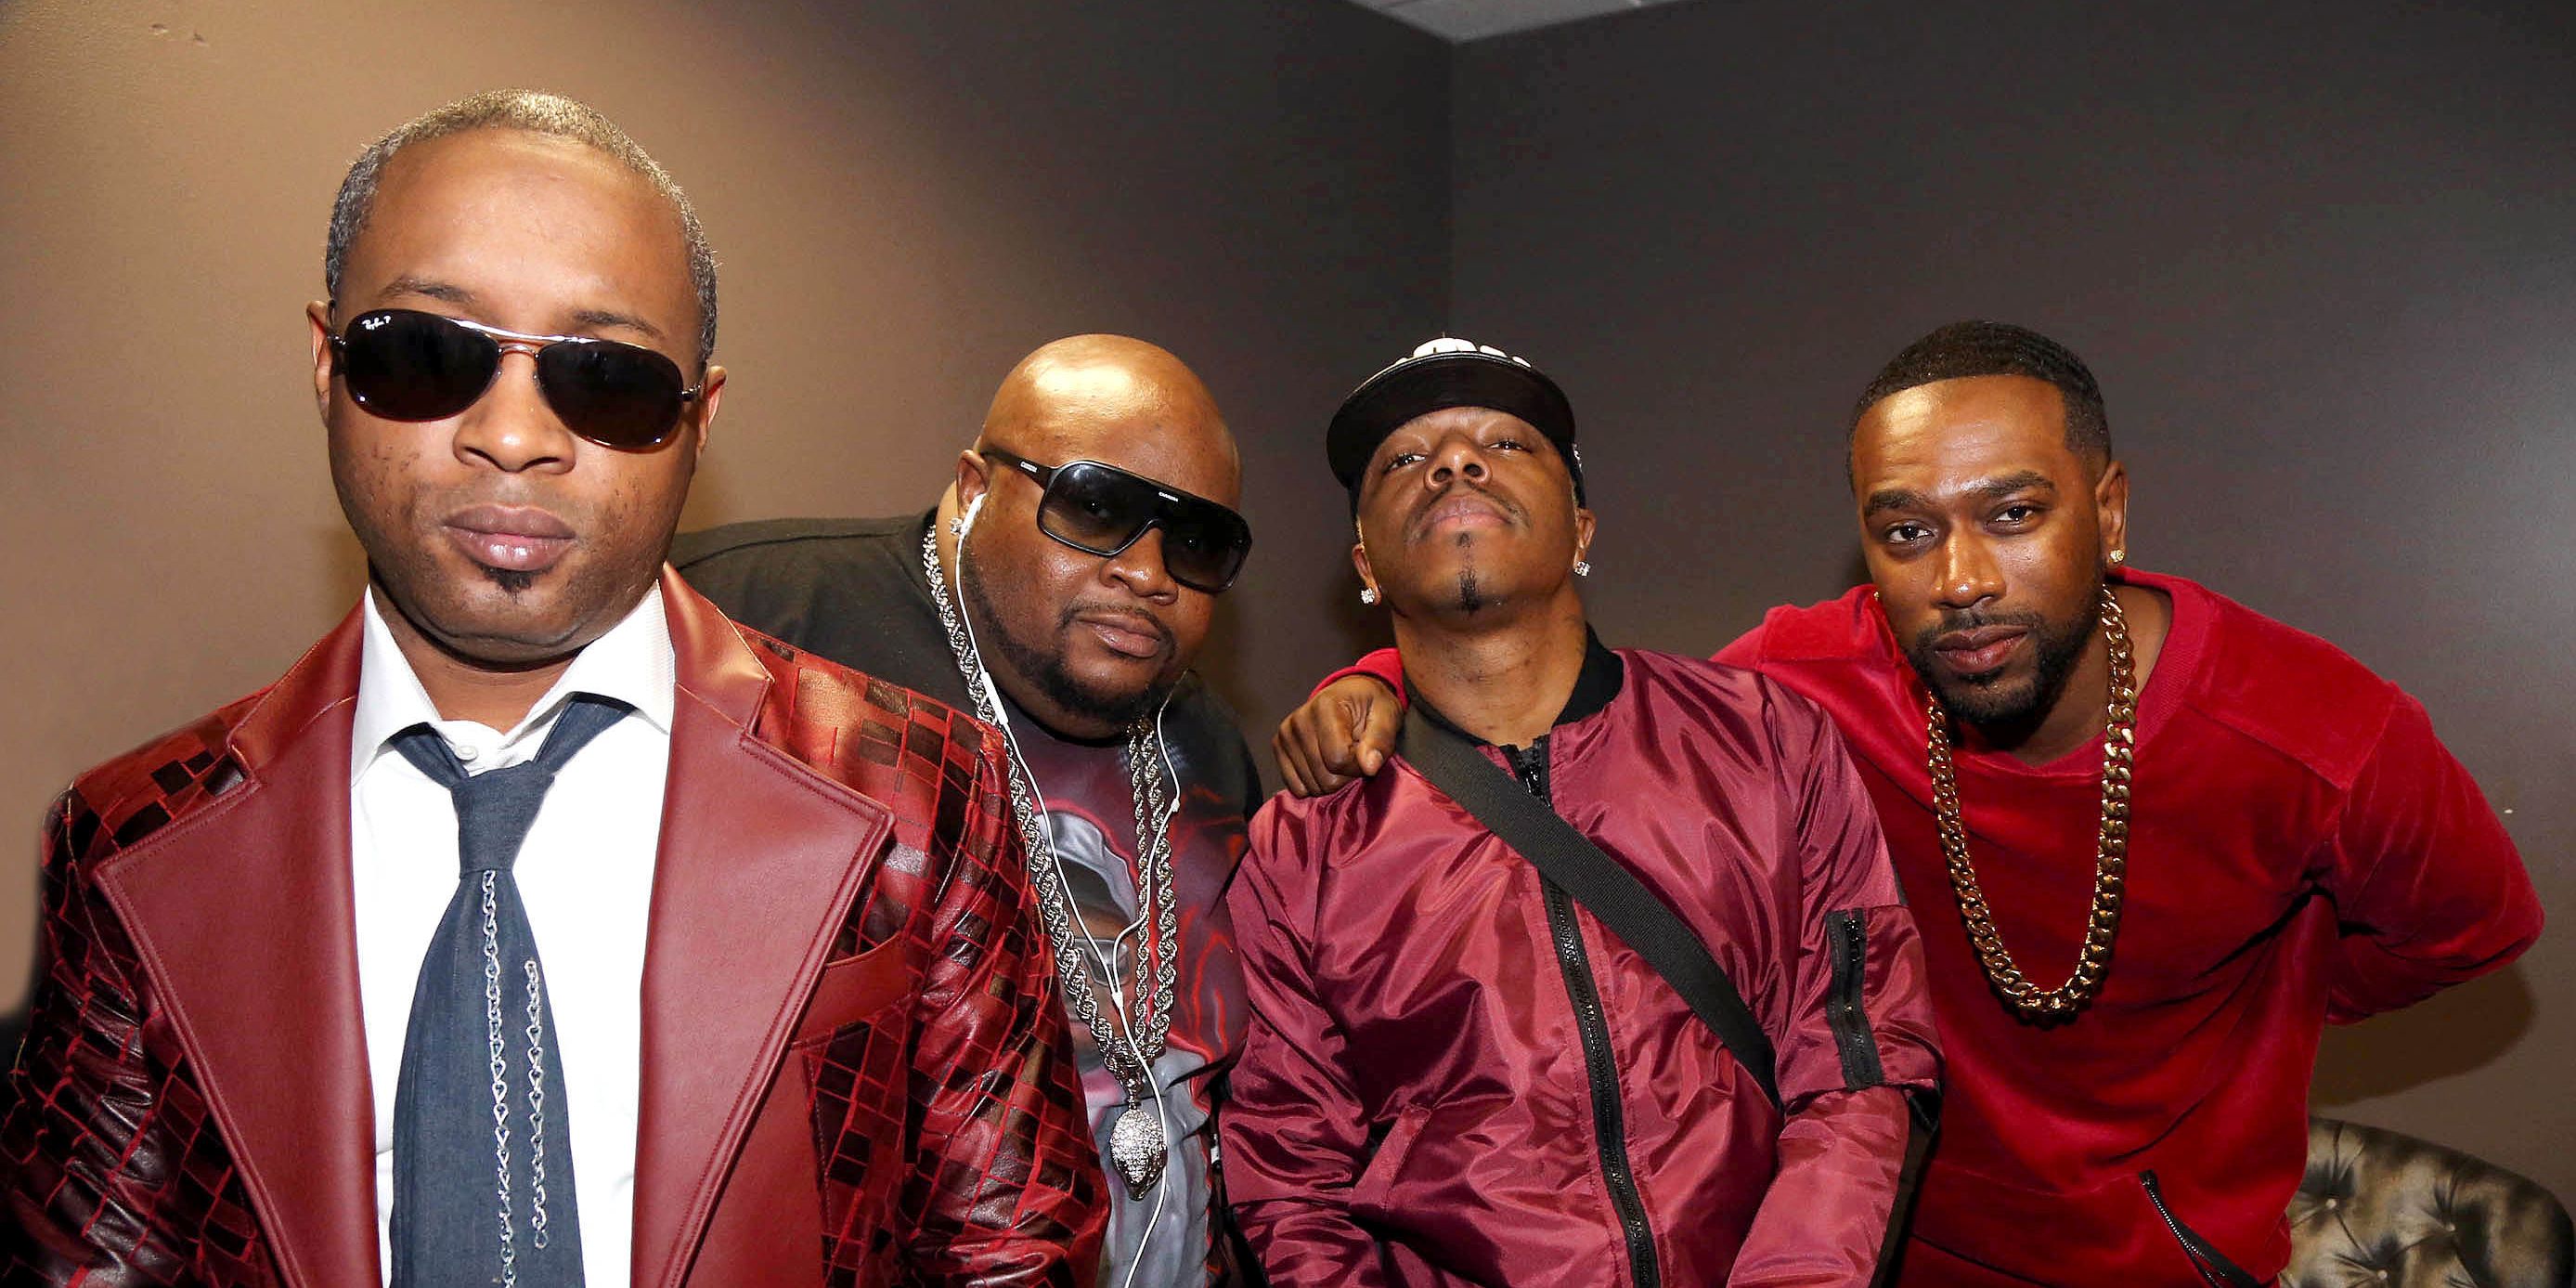 Dru Hill Drop 'Christmas in Baltimore' EP, Their First Project in 7